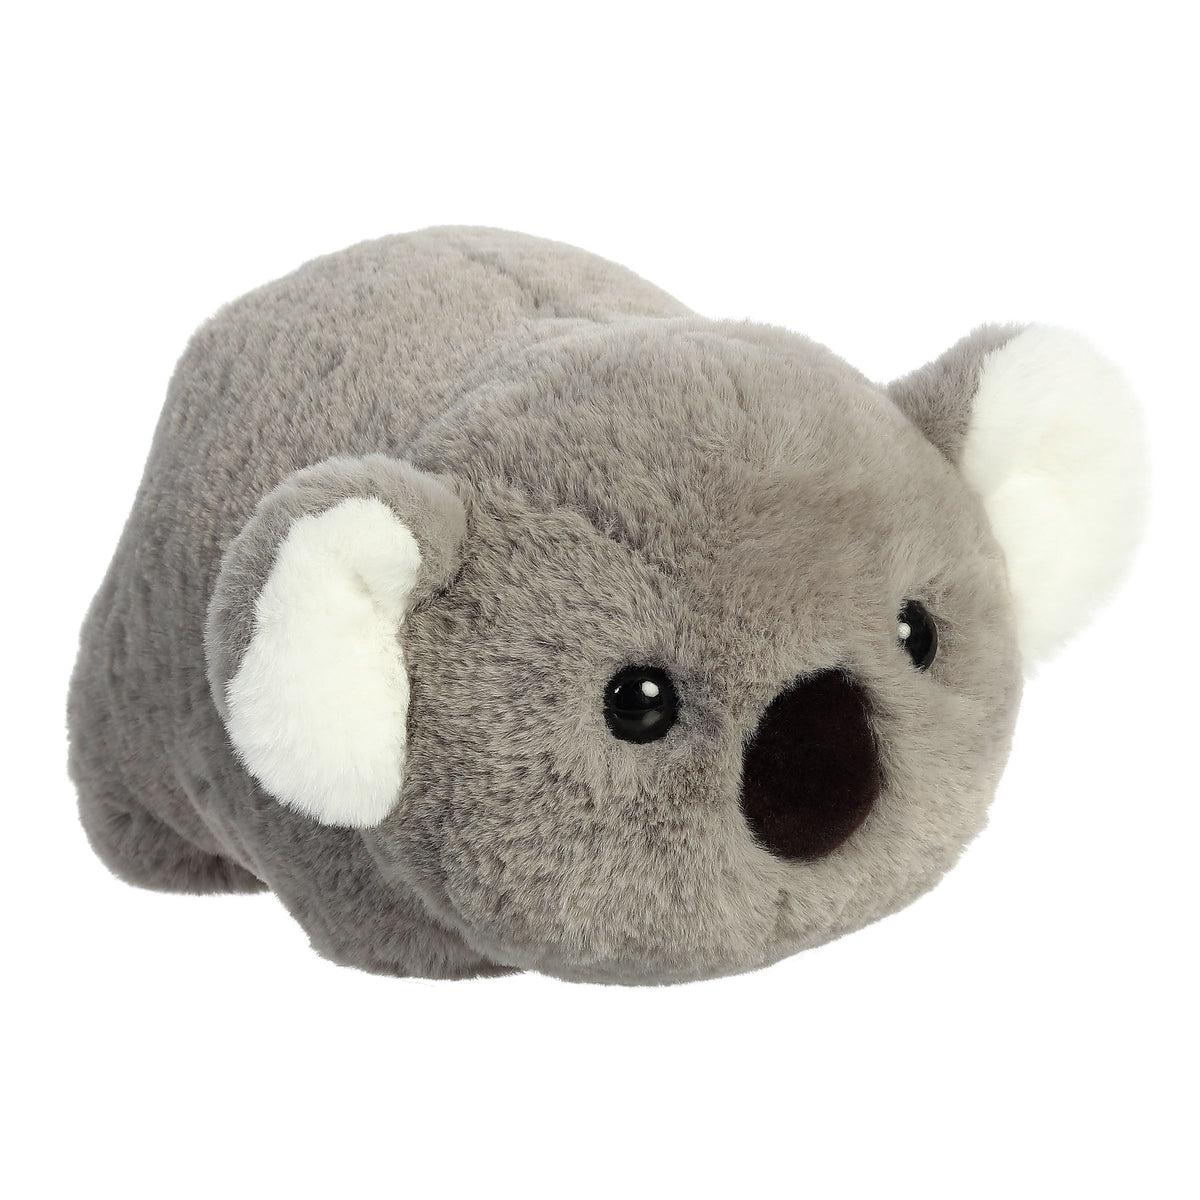 Kira Koala from Aurora's Spudsters Collection, with a rounded, potato-shaped body in plush grey fur and a koala face!